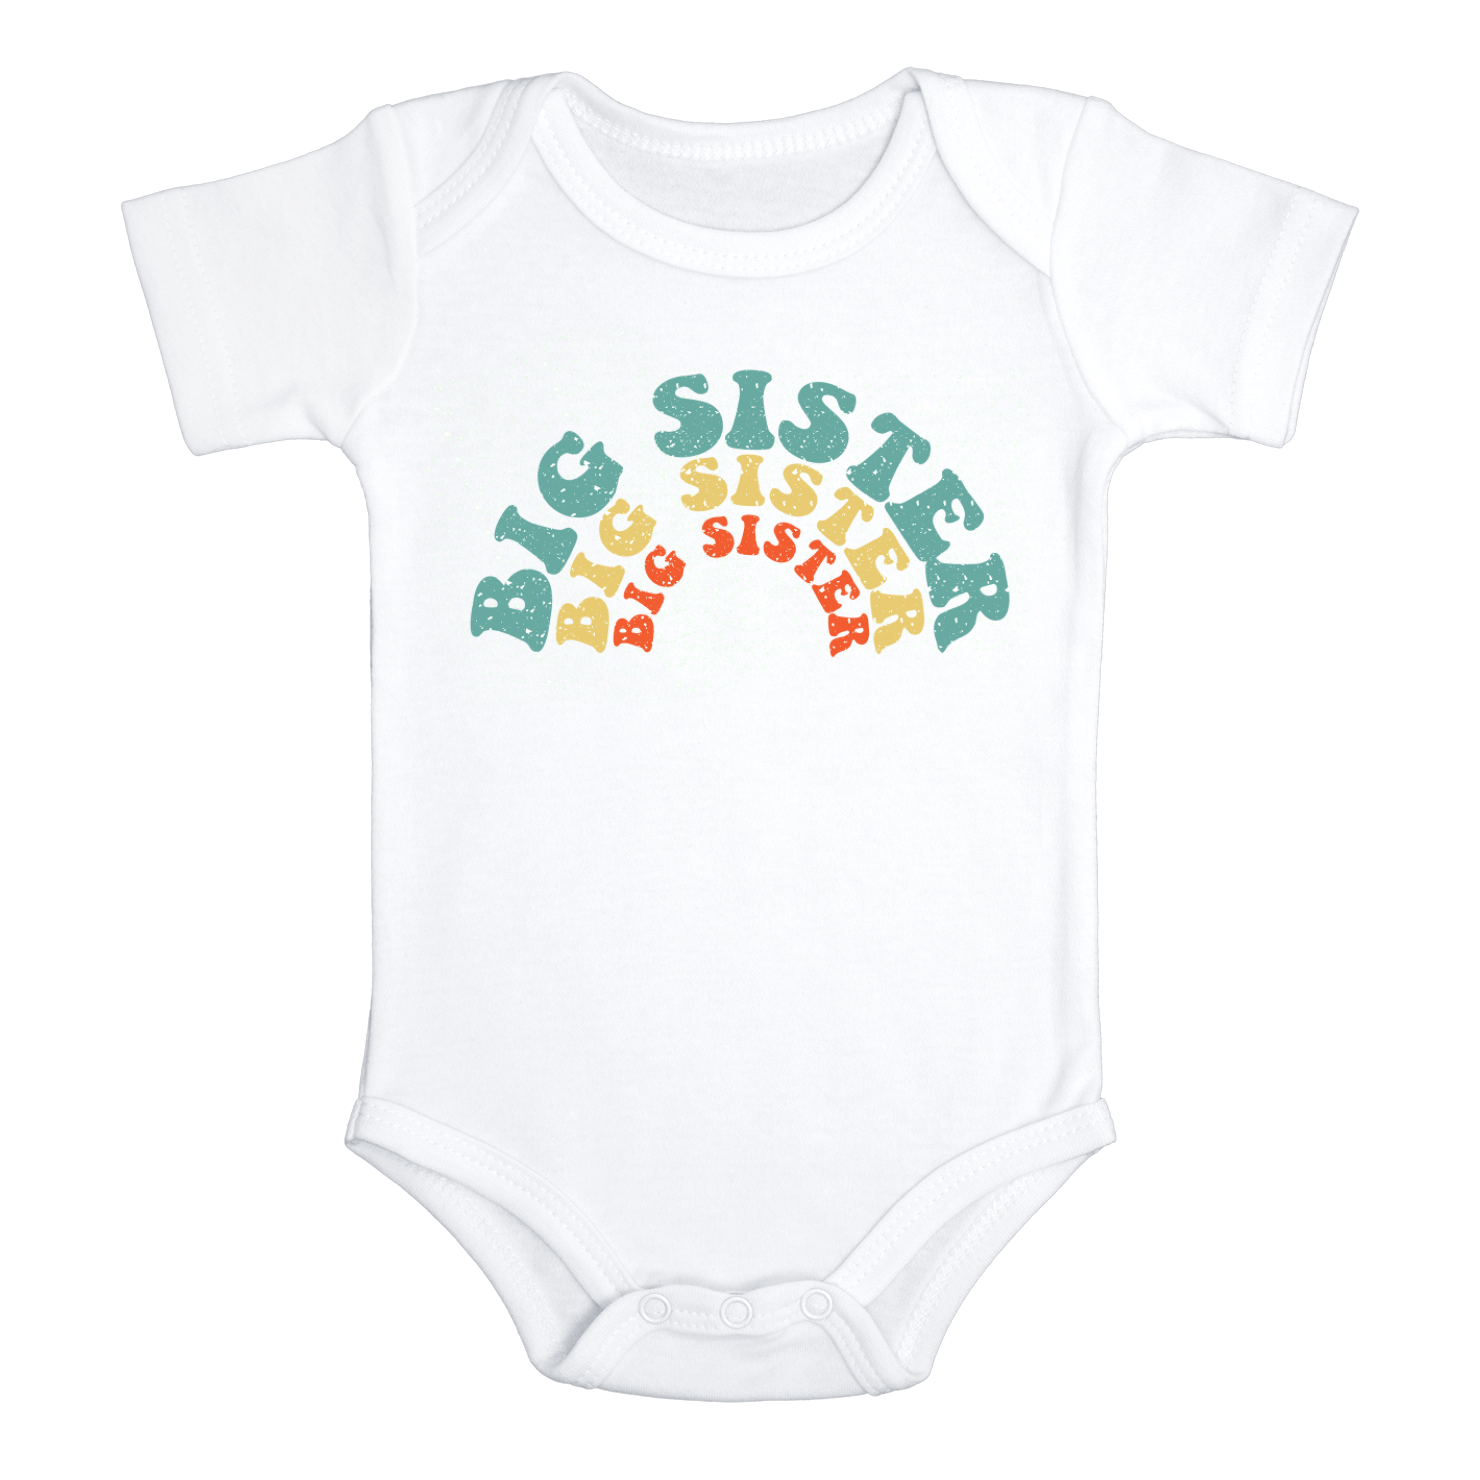 BIG SISTER Funny Baby Sister Rainbow Onesie Baby Girl Body Suit  (white: short or long sleeve) toddler 3t 4t 5t Available